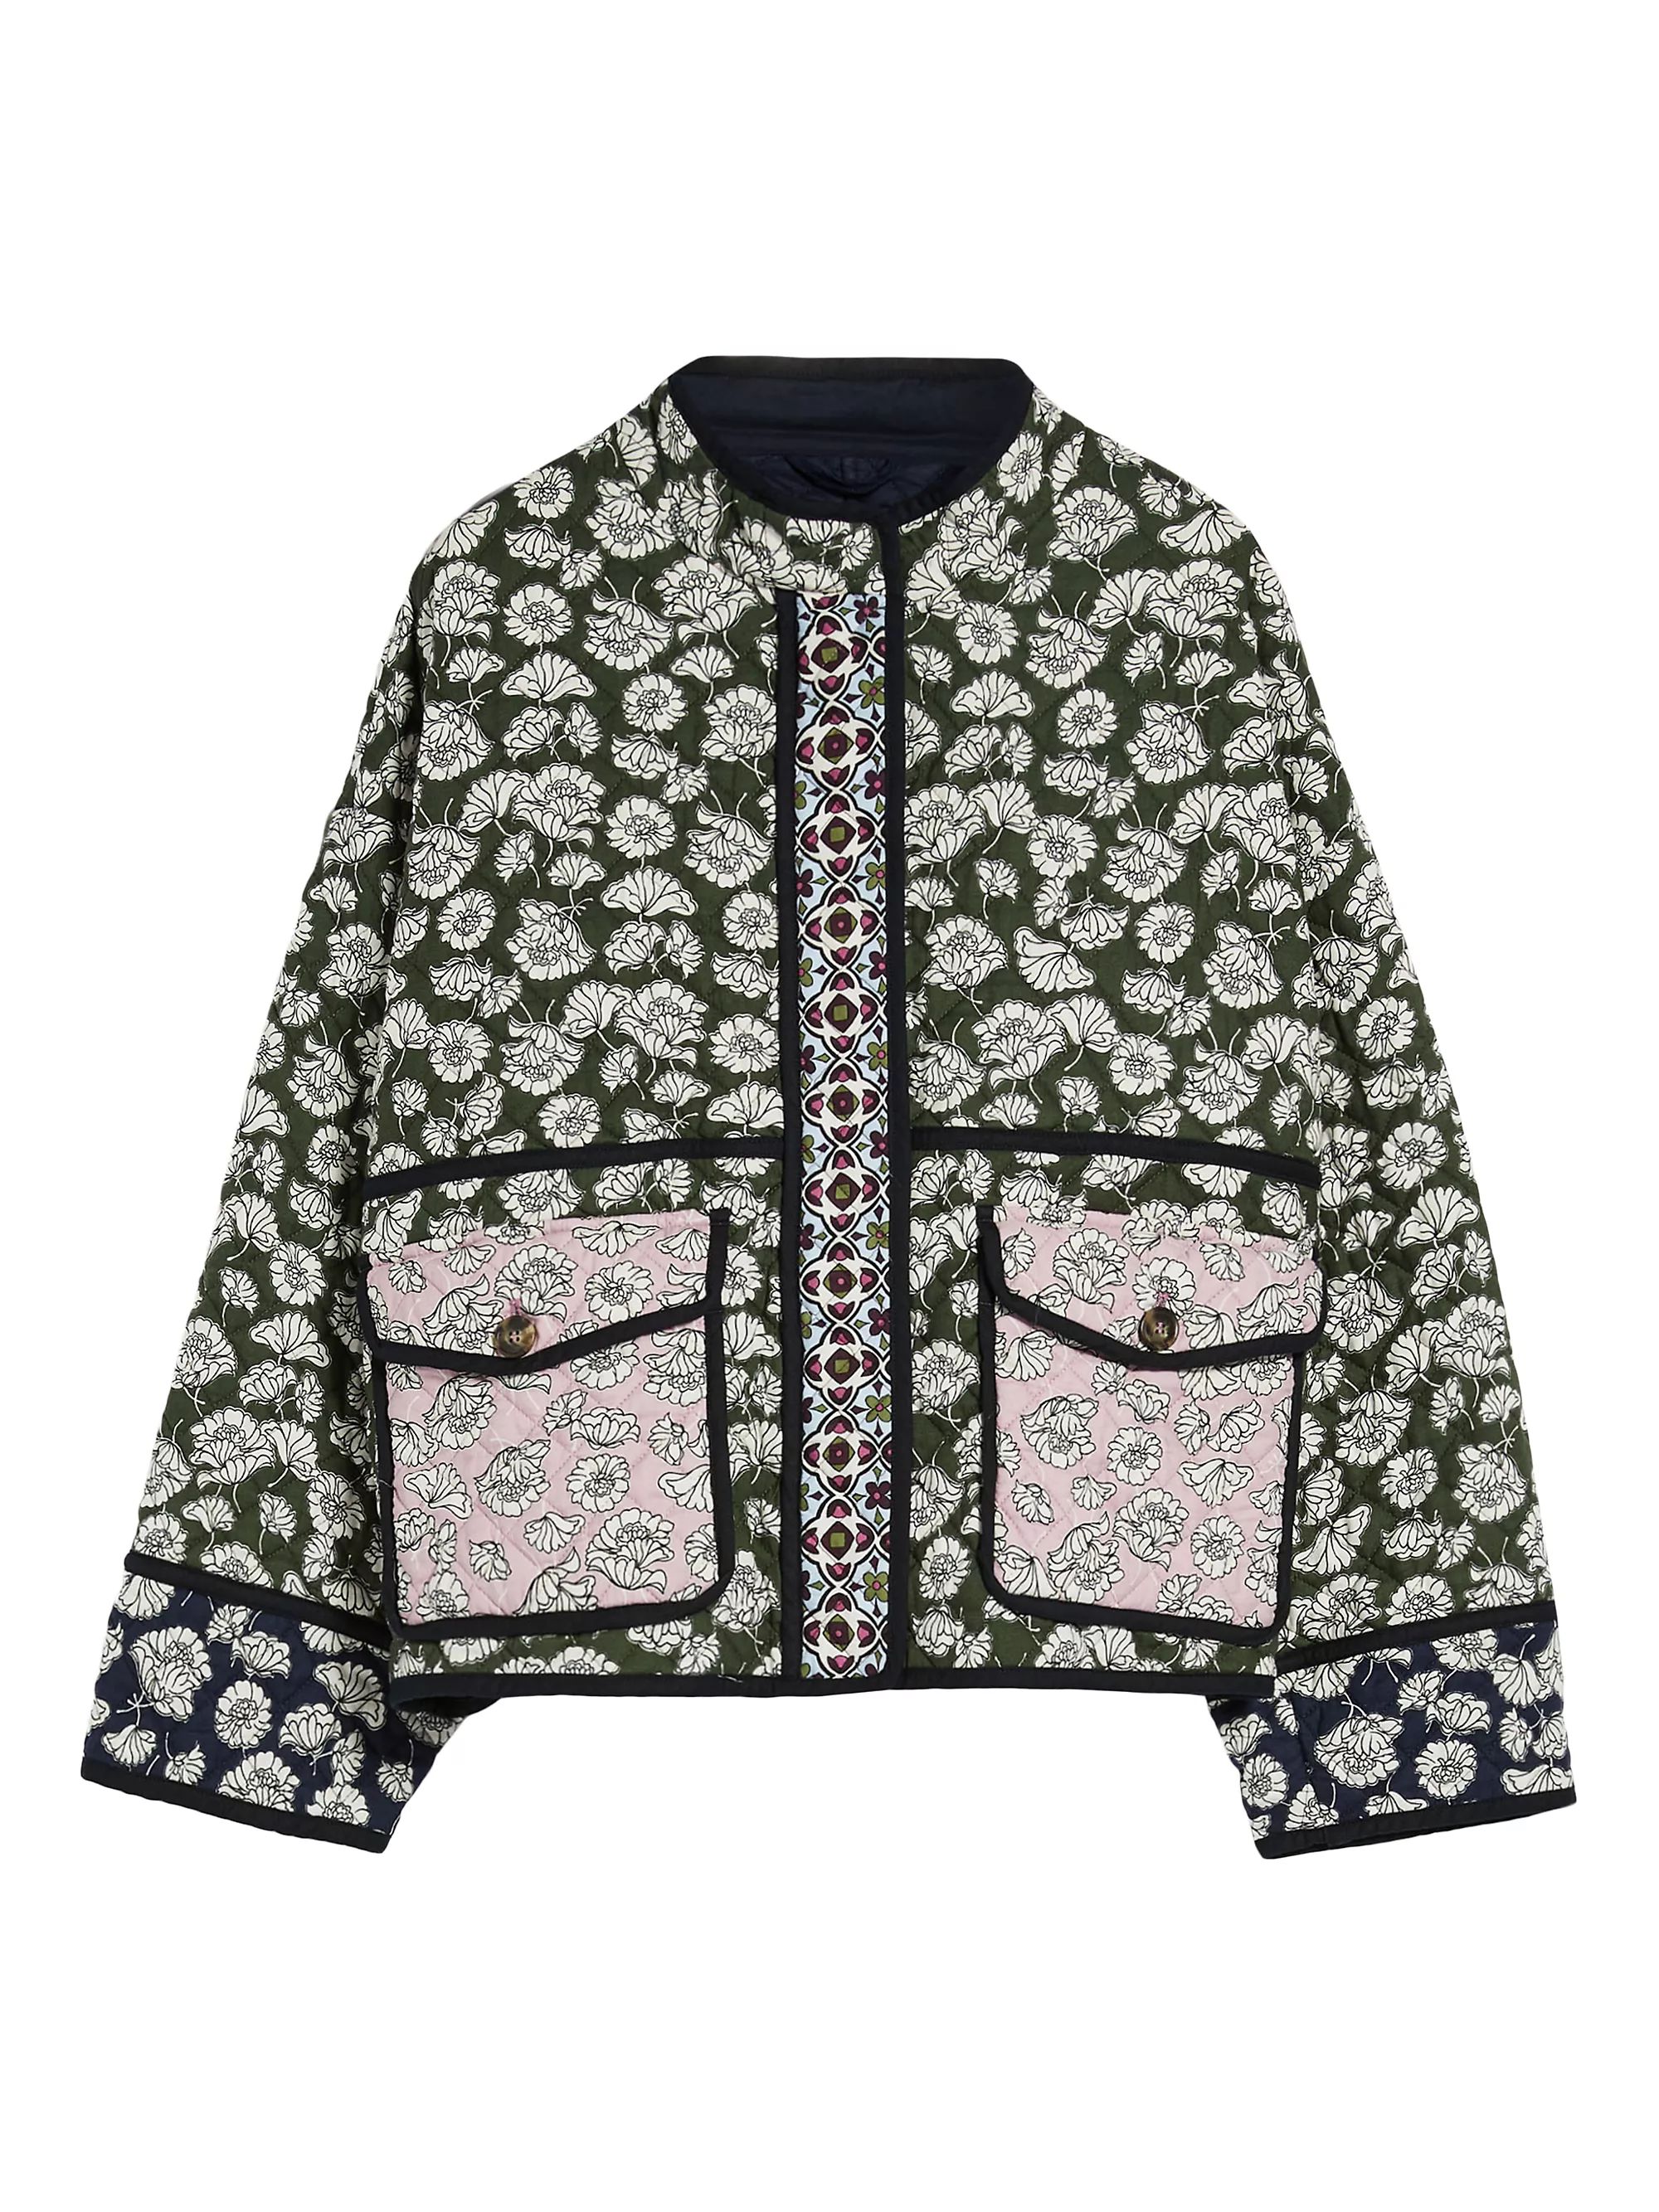 Arizia Floral Quilted Jacket | Saks Fifth Avenue